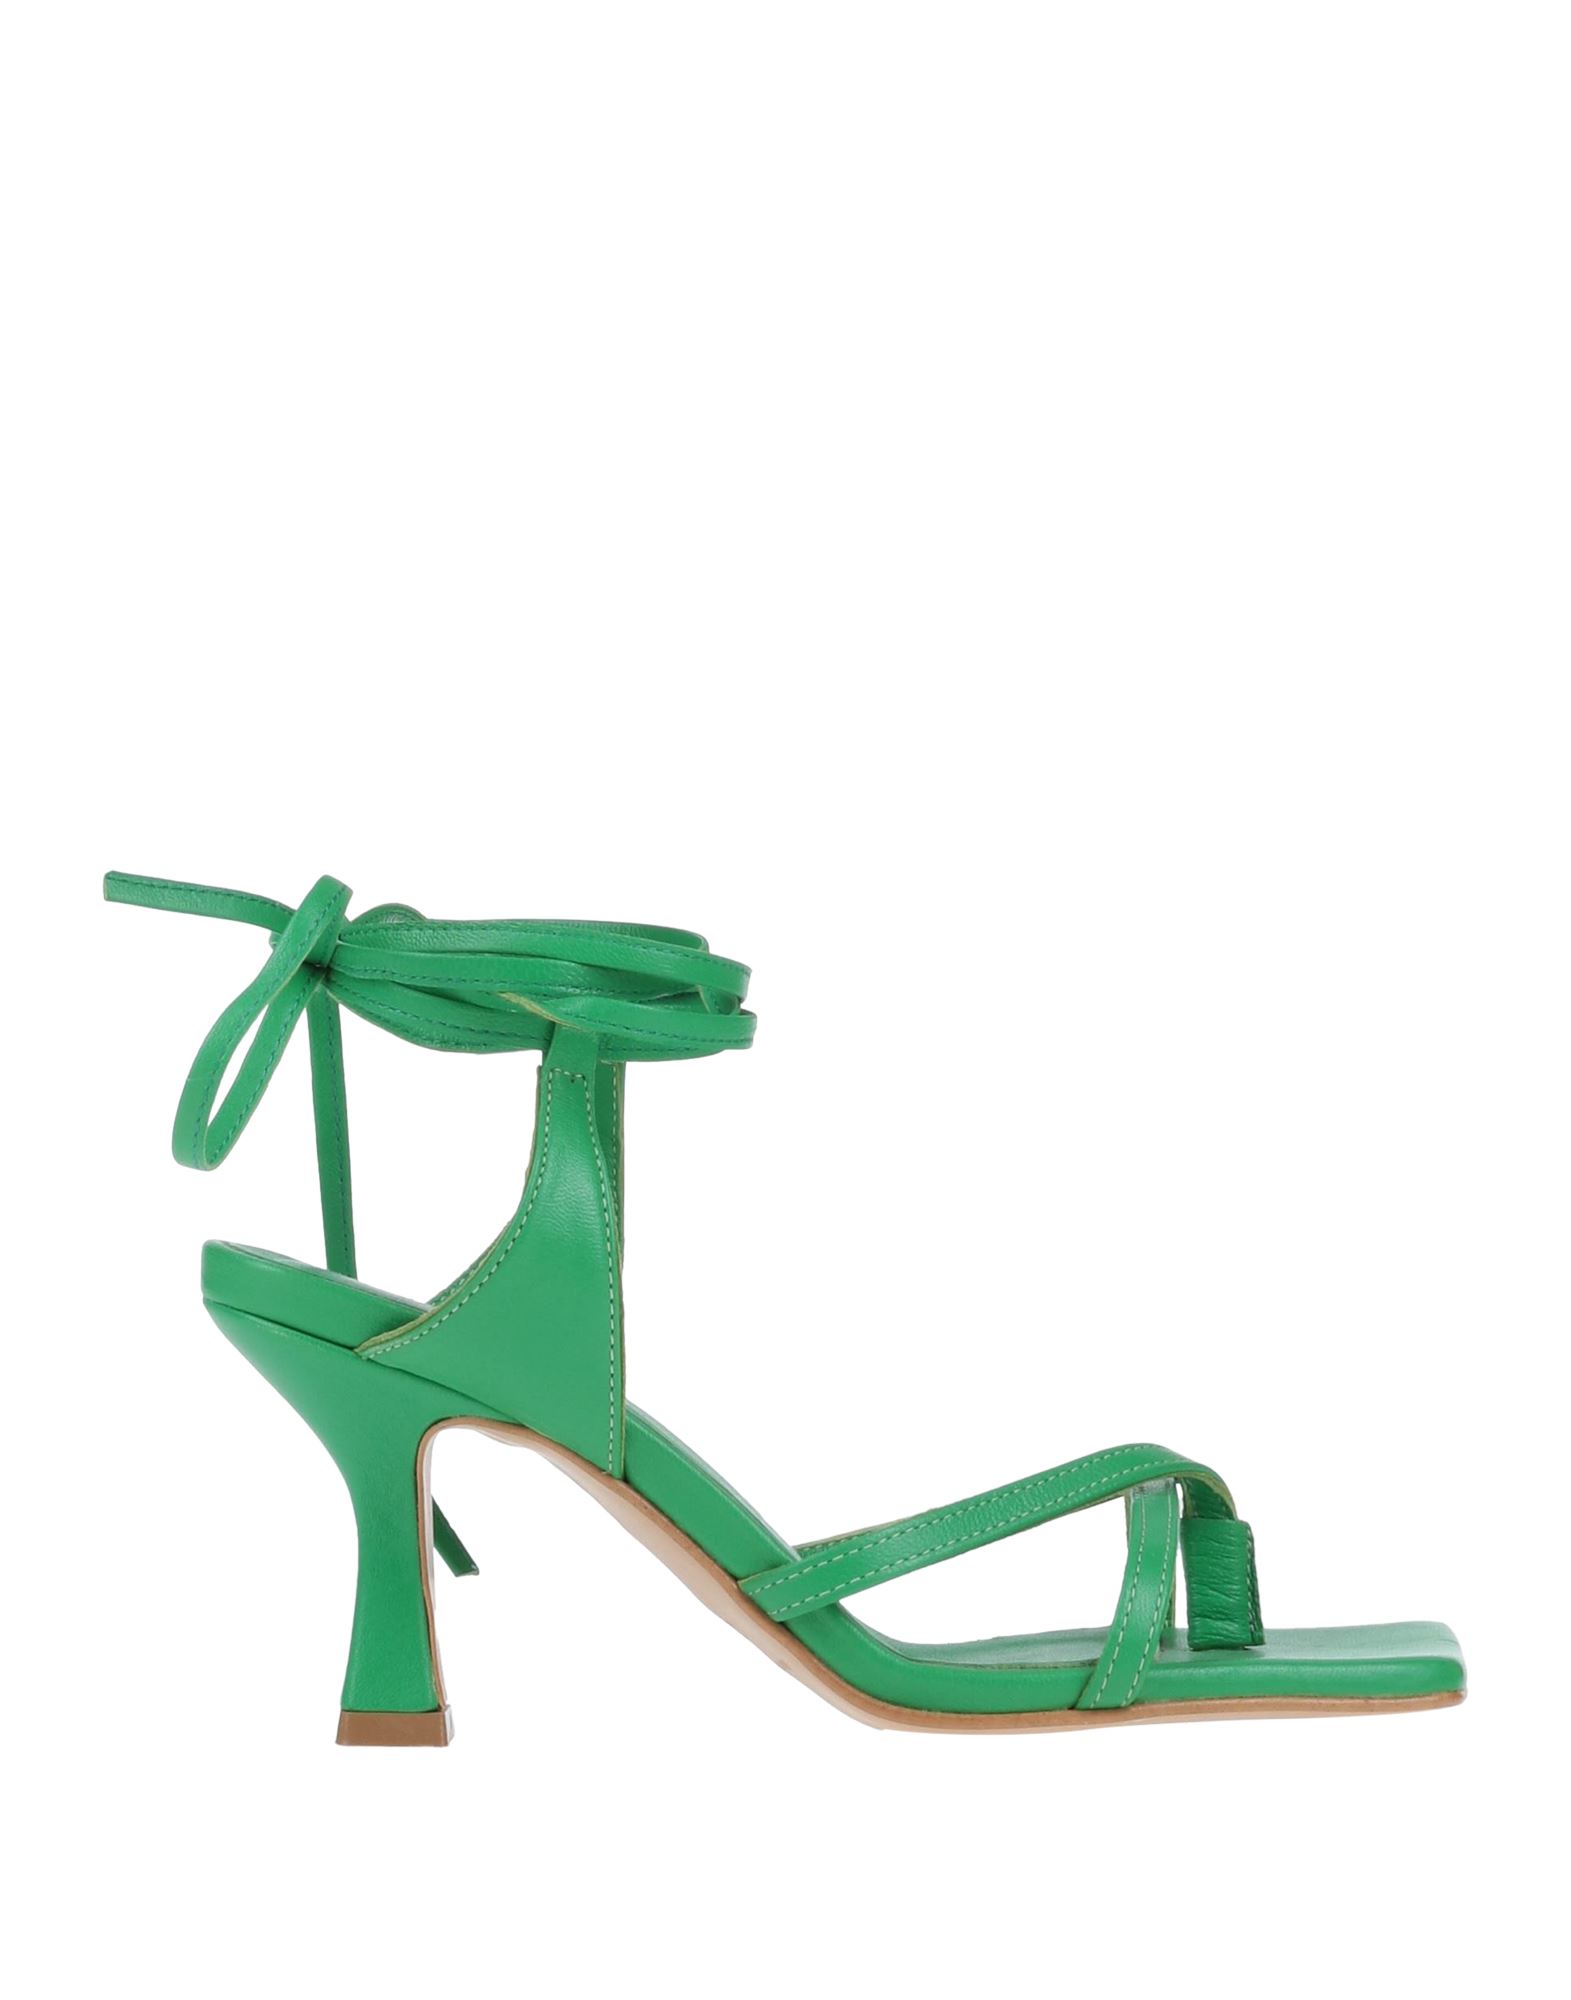 Ovye' By Cristina Lucchi Toe Strap Sandals In Green